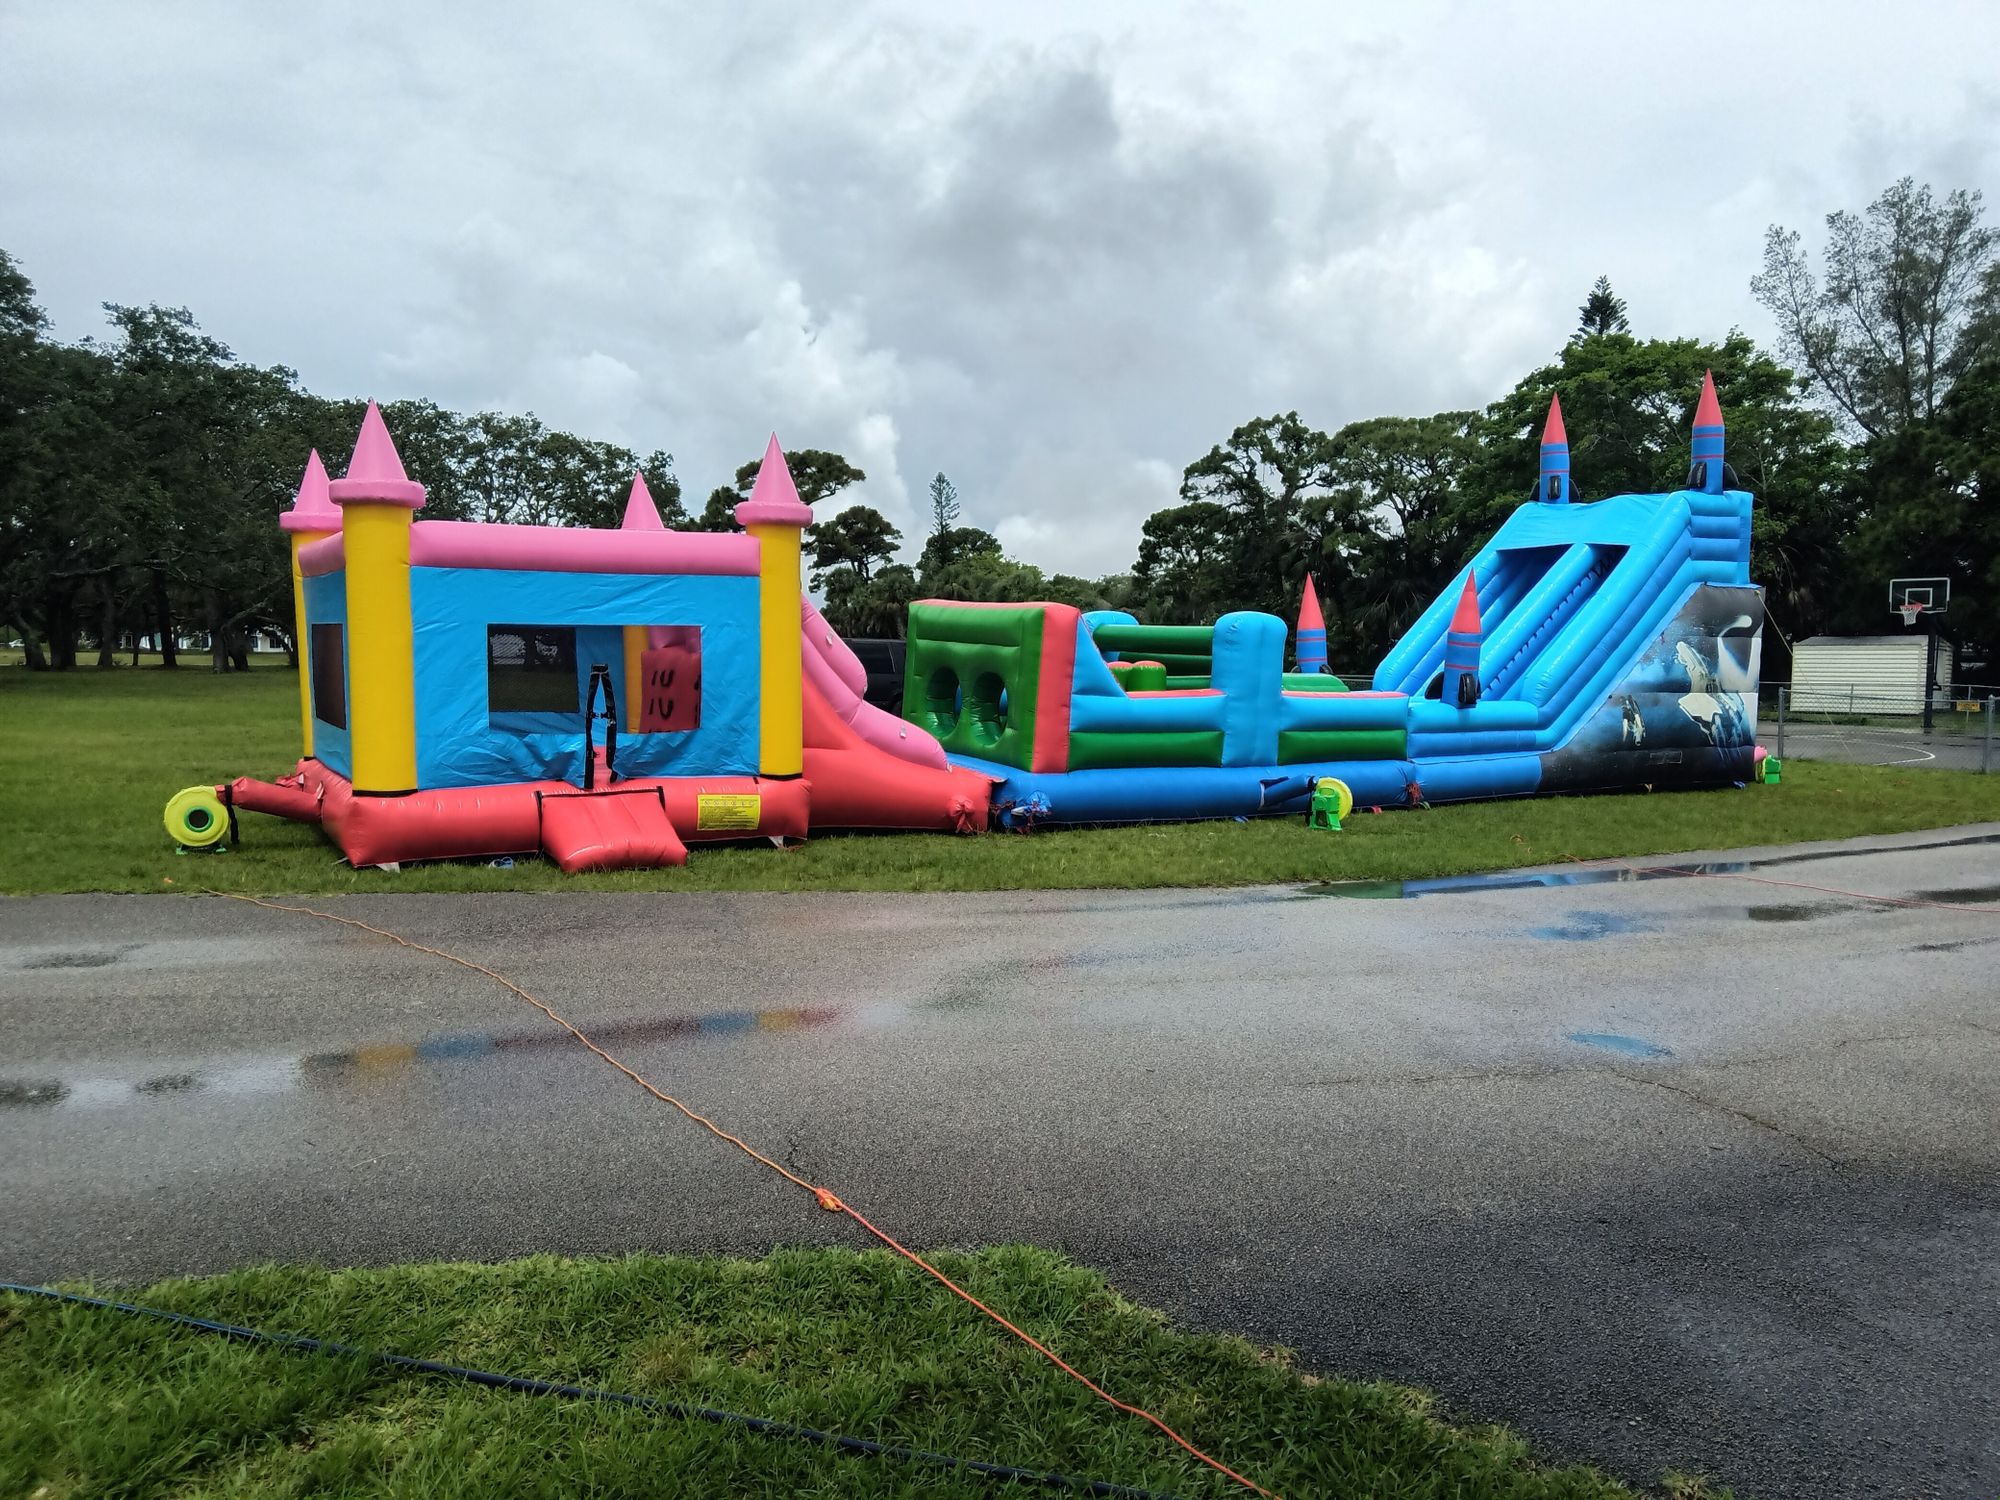 60 ft long obstacle course $329 wet $350